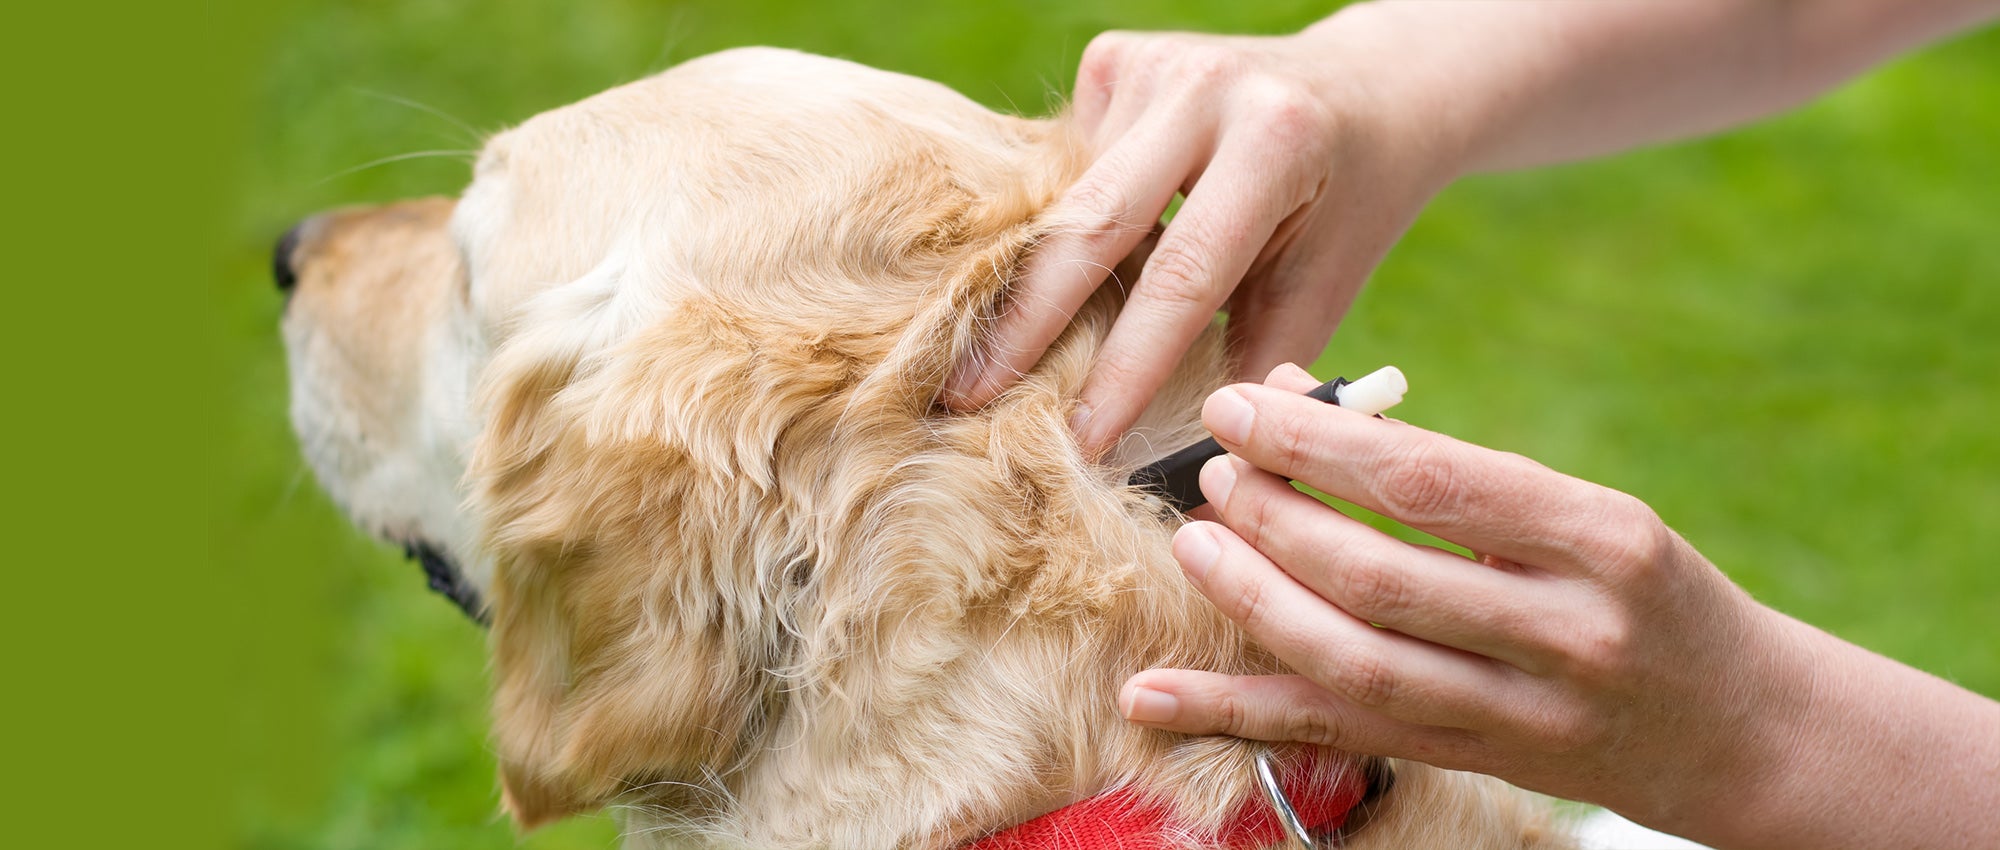 How to remove tick on dog | The Humane Society of the United States